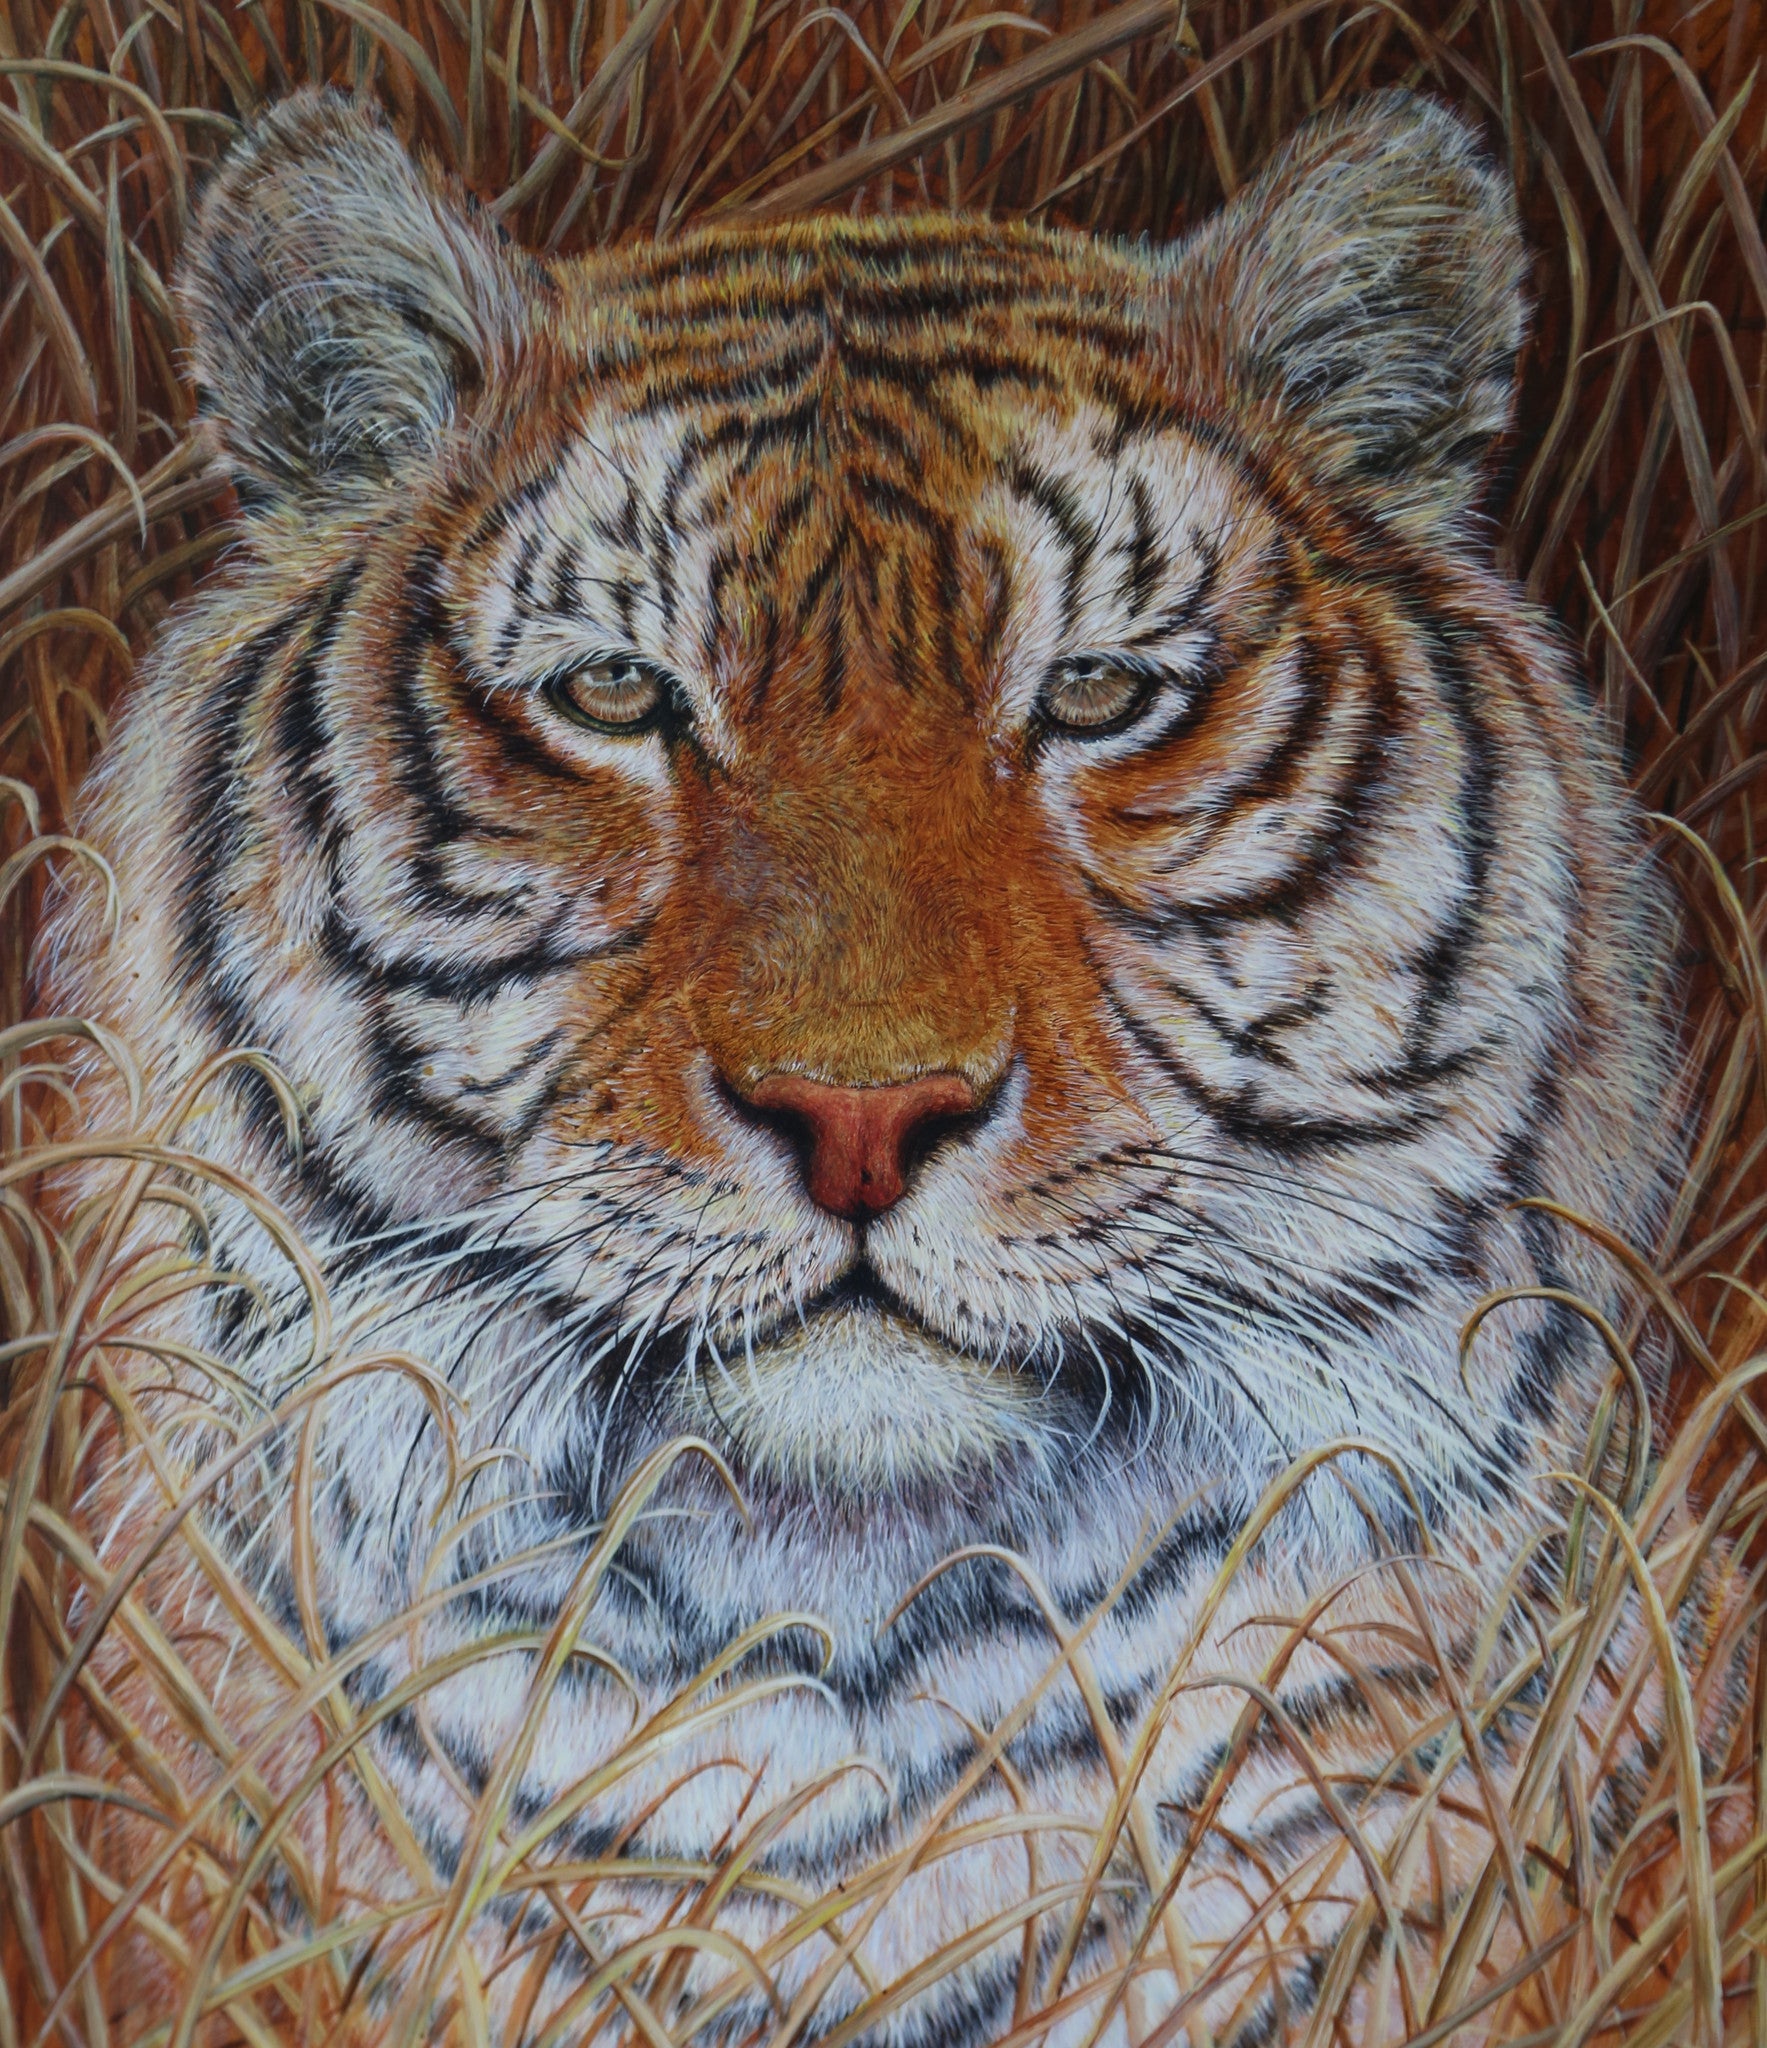 Tiger painting by Stephen Hewer close up